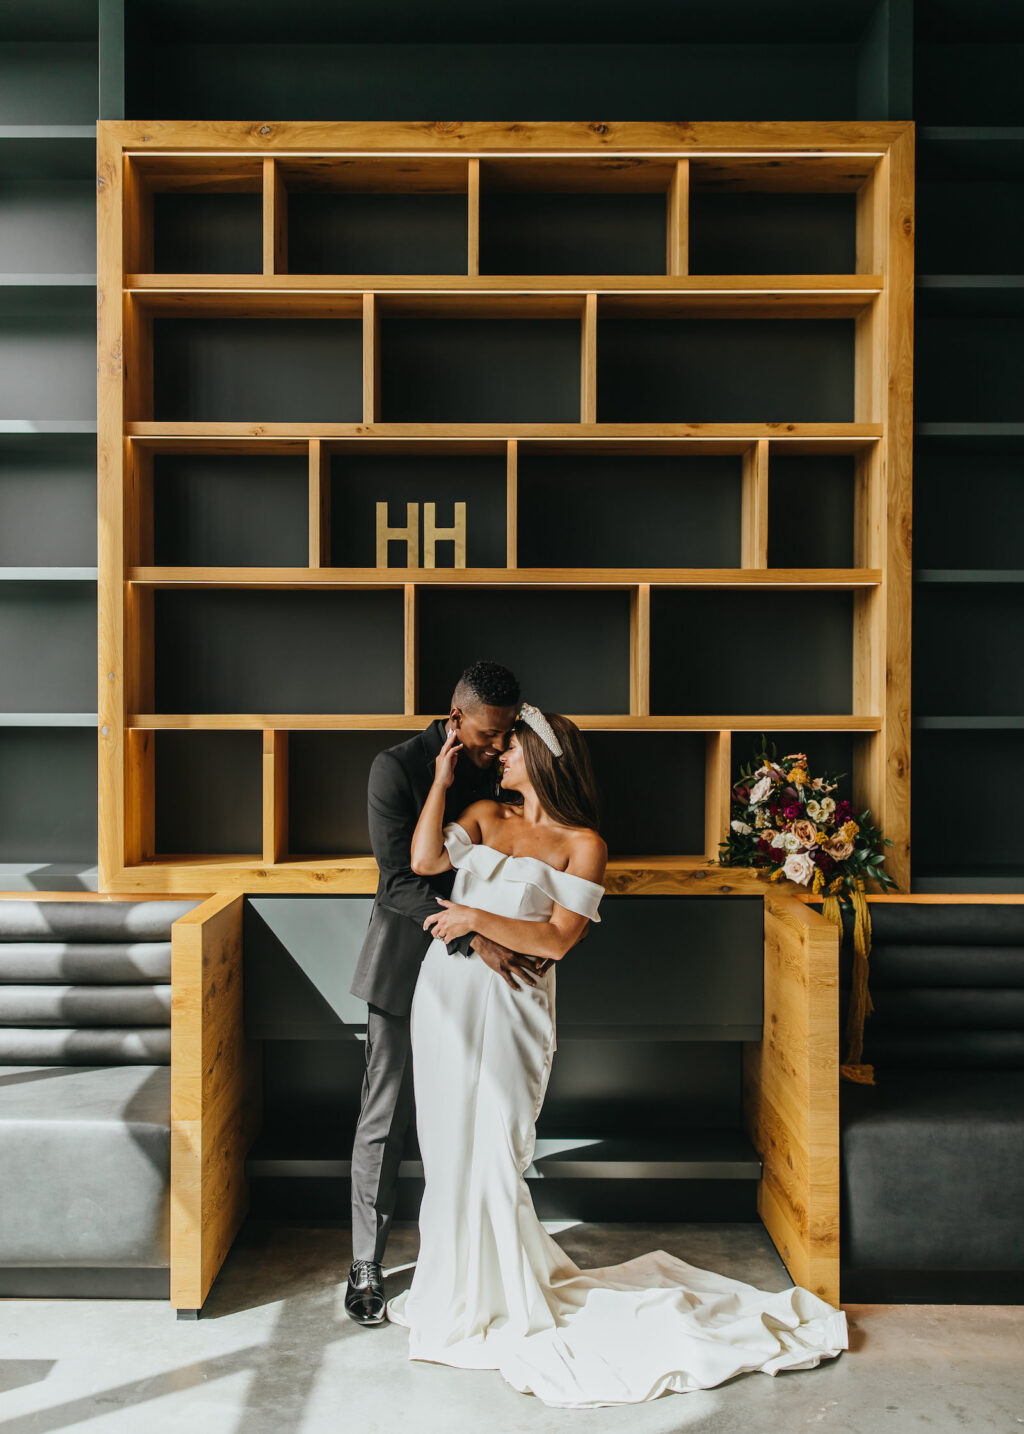 Modern and Edgy Fall Wedding, Tampa Bride Wearing Off the Shoulder Wedding Dress Holding Yellow, Burgundy Red and Blush Pink Roses Floral Bouquet with Greenery, Groom Wearing All Black Tuxedo and Peach Rose Boutonniere Sitting on Couch | Tampa Bay Wedding Venue Hyde House